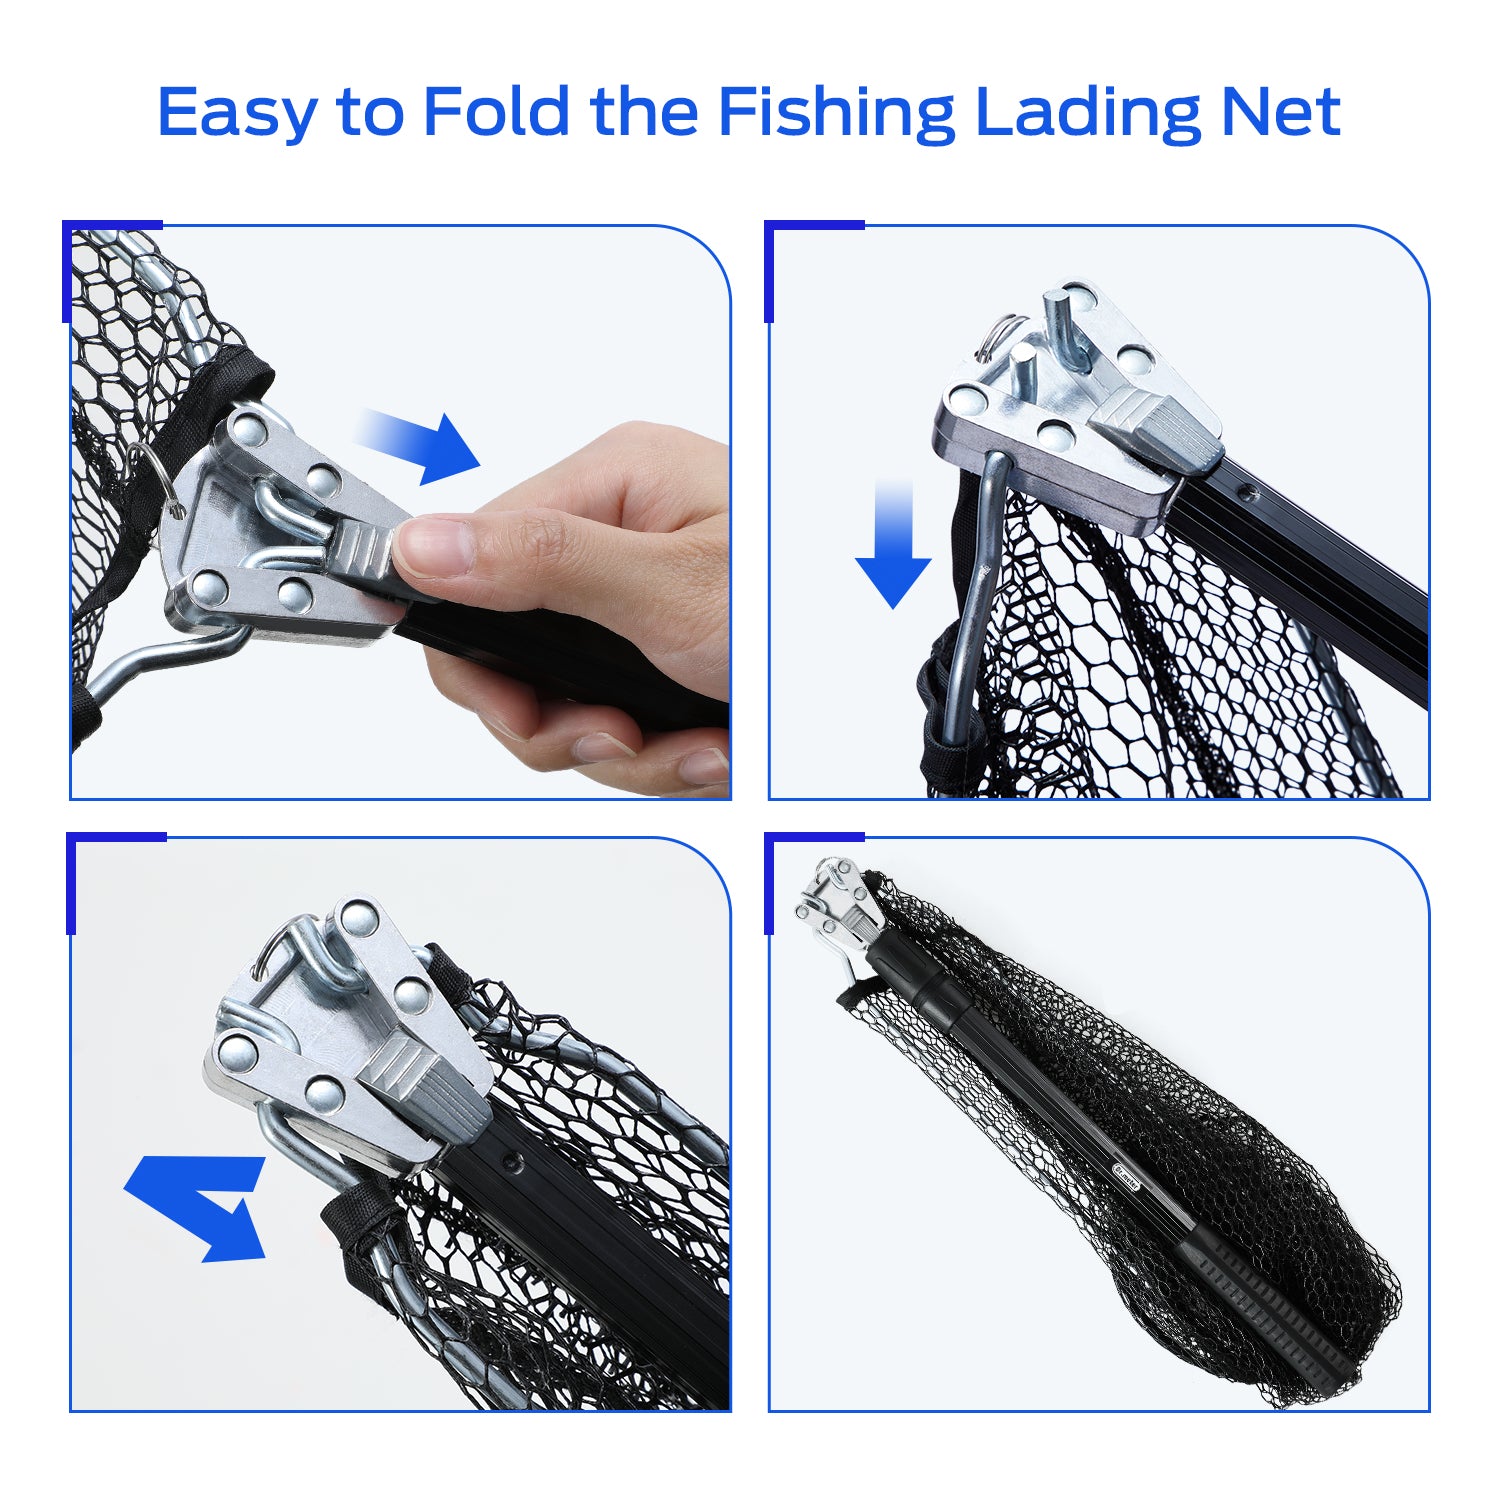 Maodom Fishing Net,Folding Landing Net with Retractable Pole - Lightweight  Fishing Accessories for Carp, Trout, Freshwater, and Saltwater